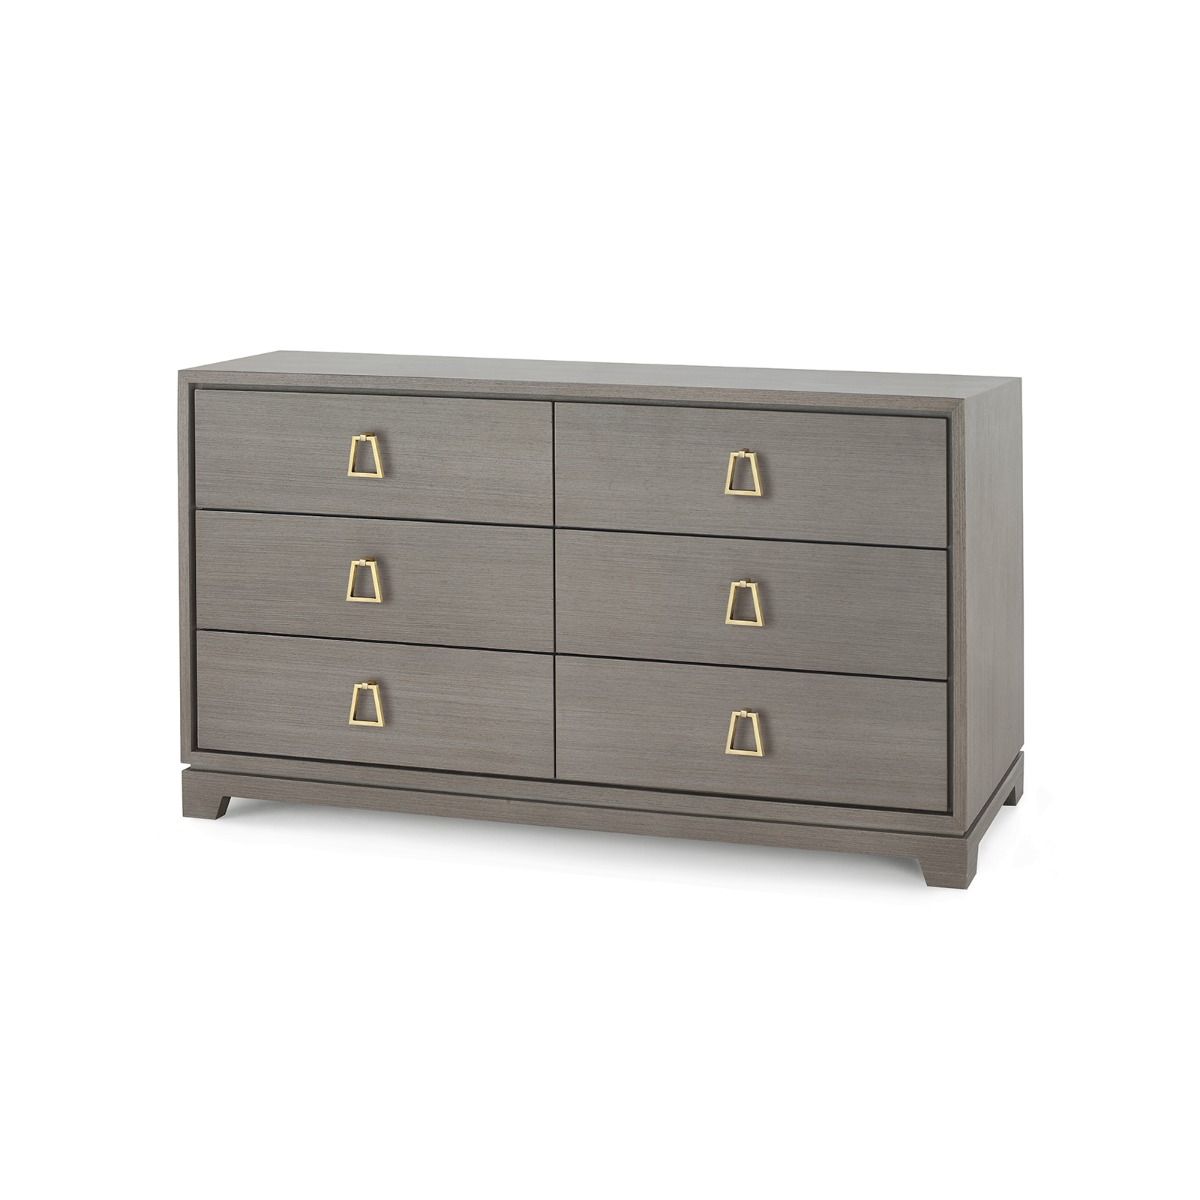 Load image into Gallery viewer, Stanford Extra Large 6-Drawer Drawer Bungalow 5     Four Hands, Burke Decor, Mid Century Modern Furniture, Old Bones Furniture Company, Old Bones Co, Modern Mid Century, Designer Furniture, https://www.oldbonesco.com/
